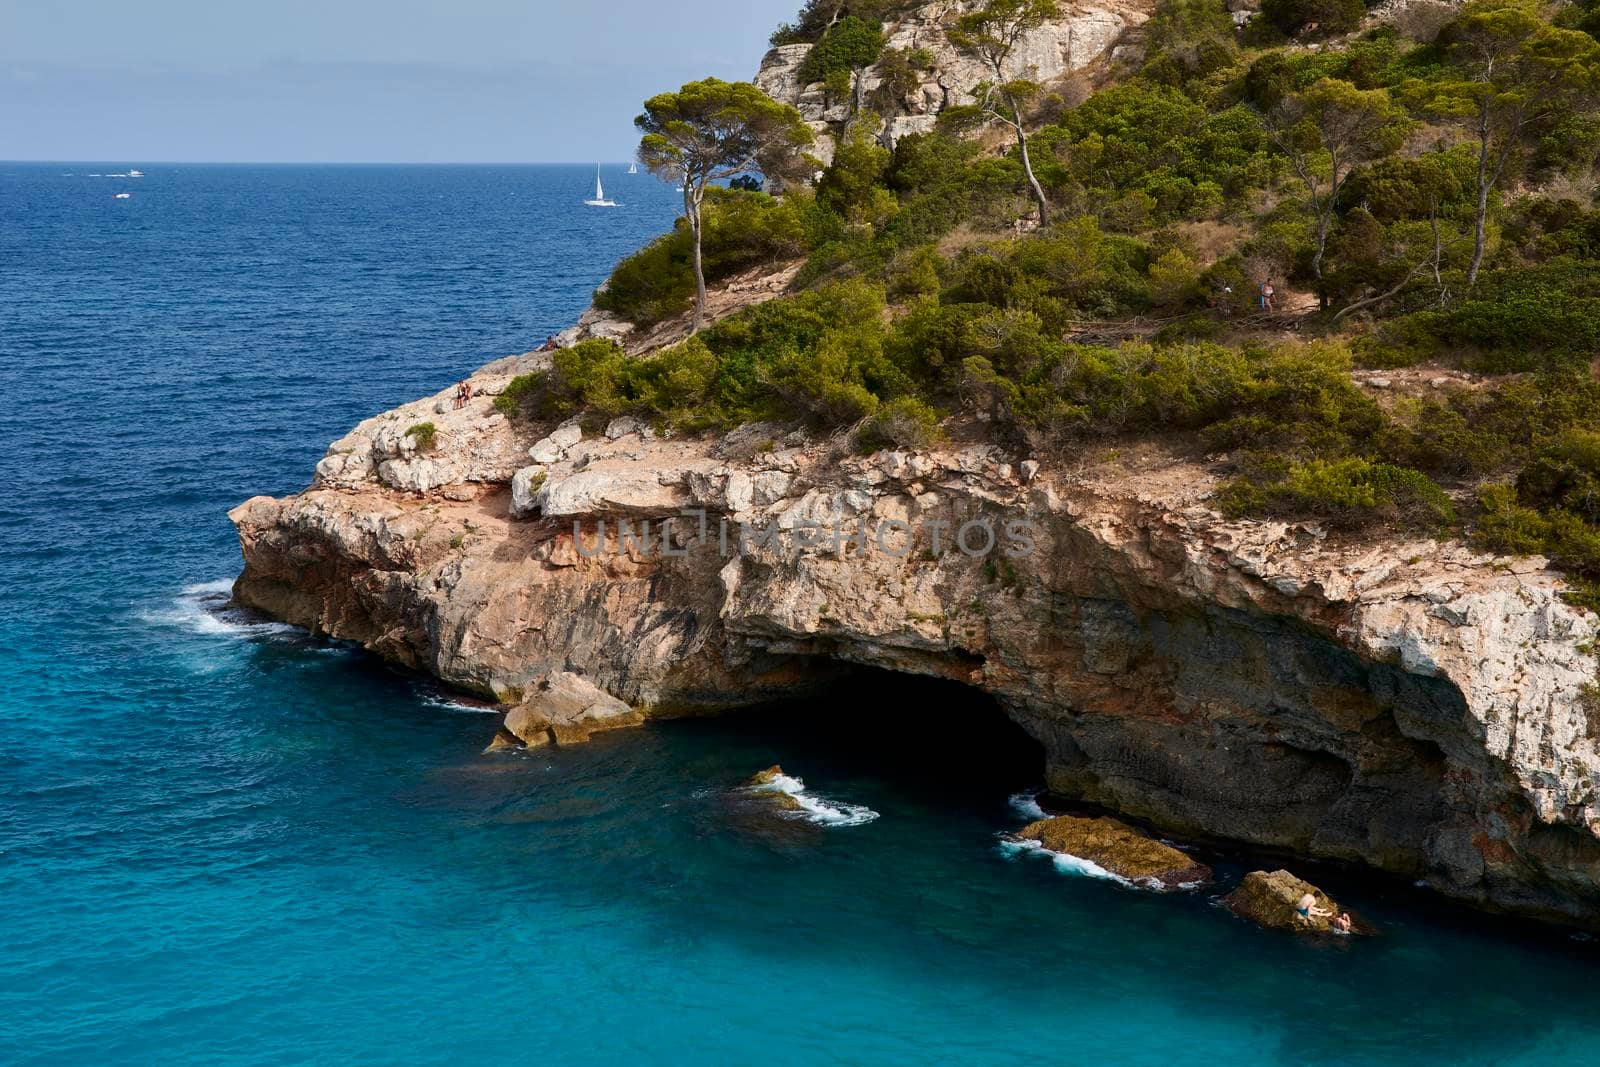 Paradise beach of the mediterranean sea, turquoise water, yes people, cliffs, rocks, white sand, Balearic Islands, Spain